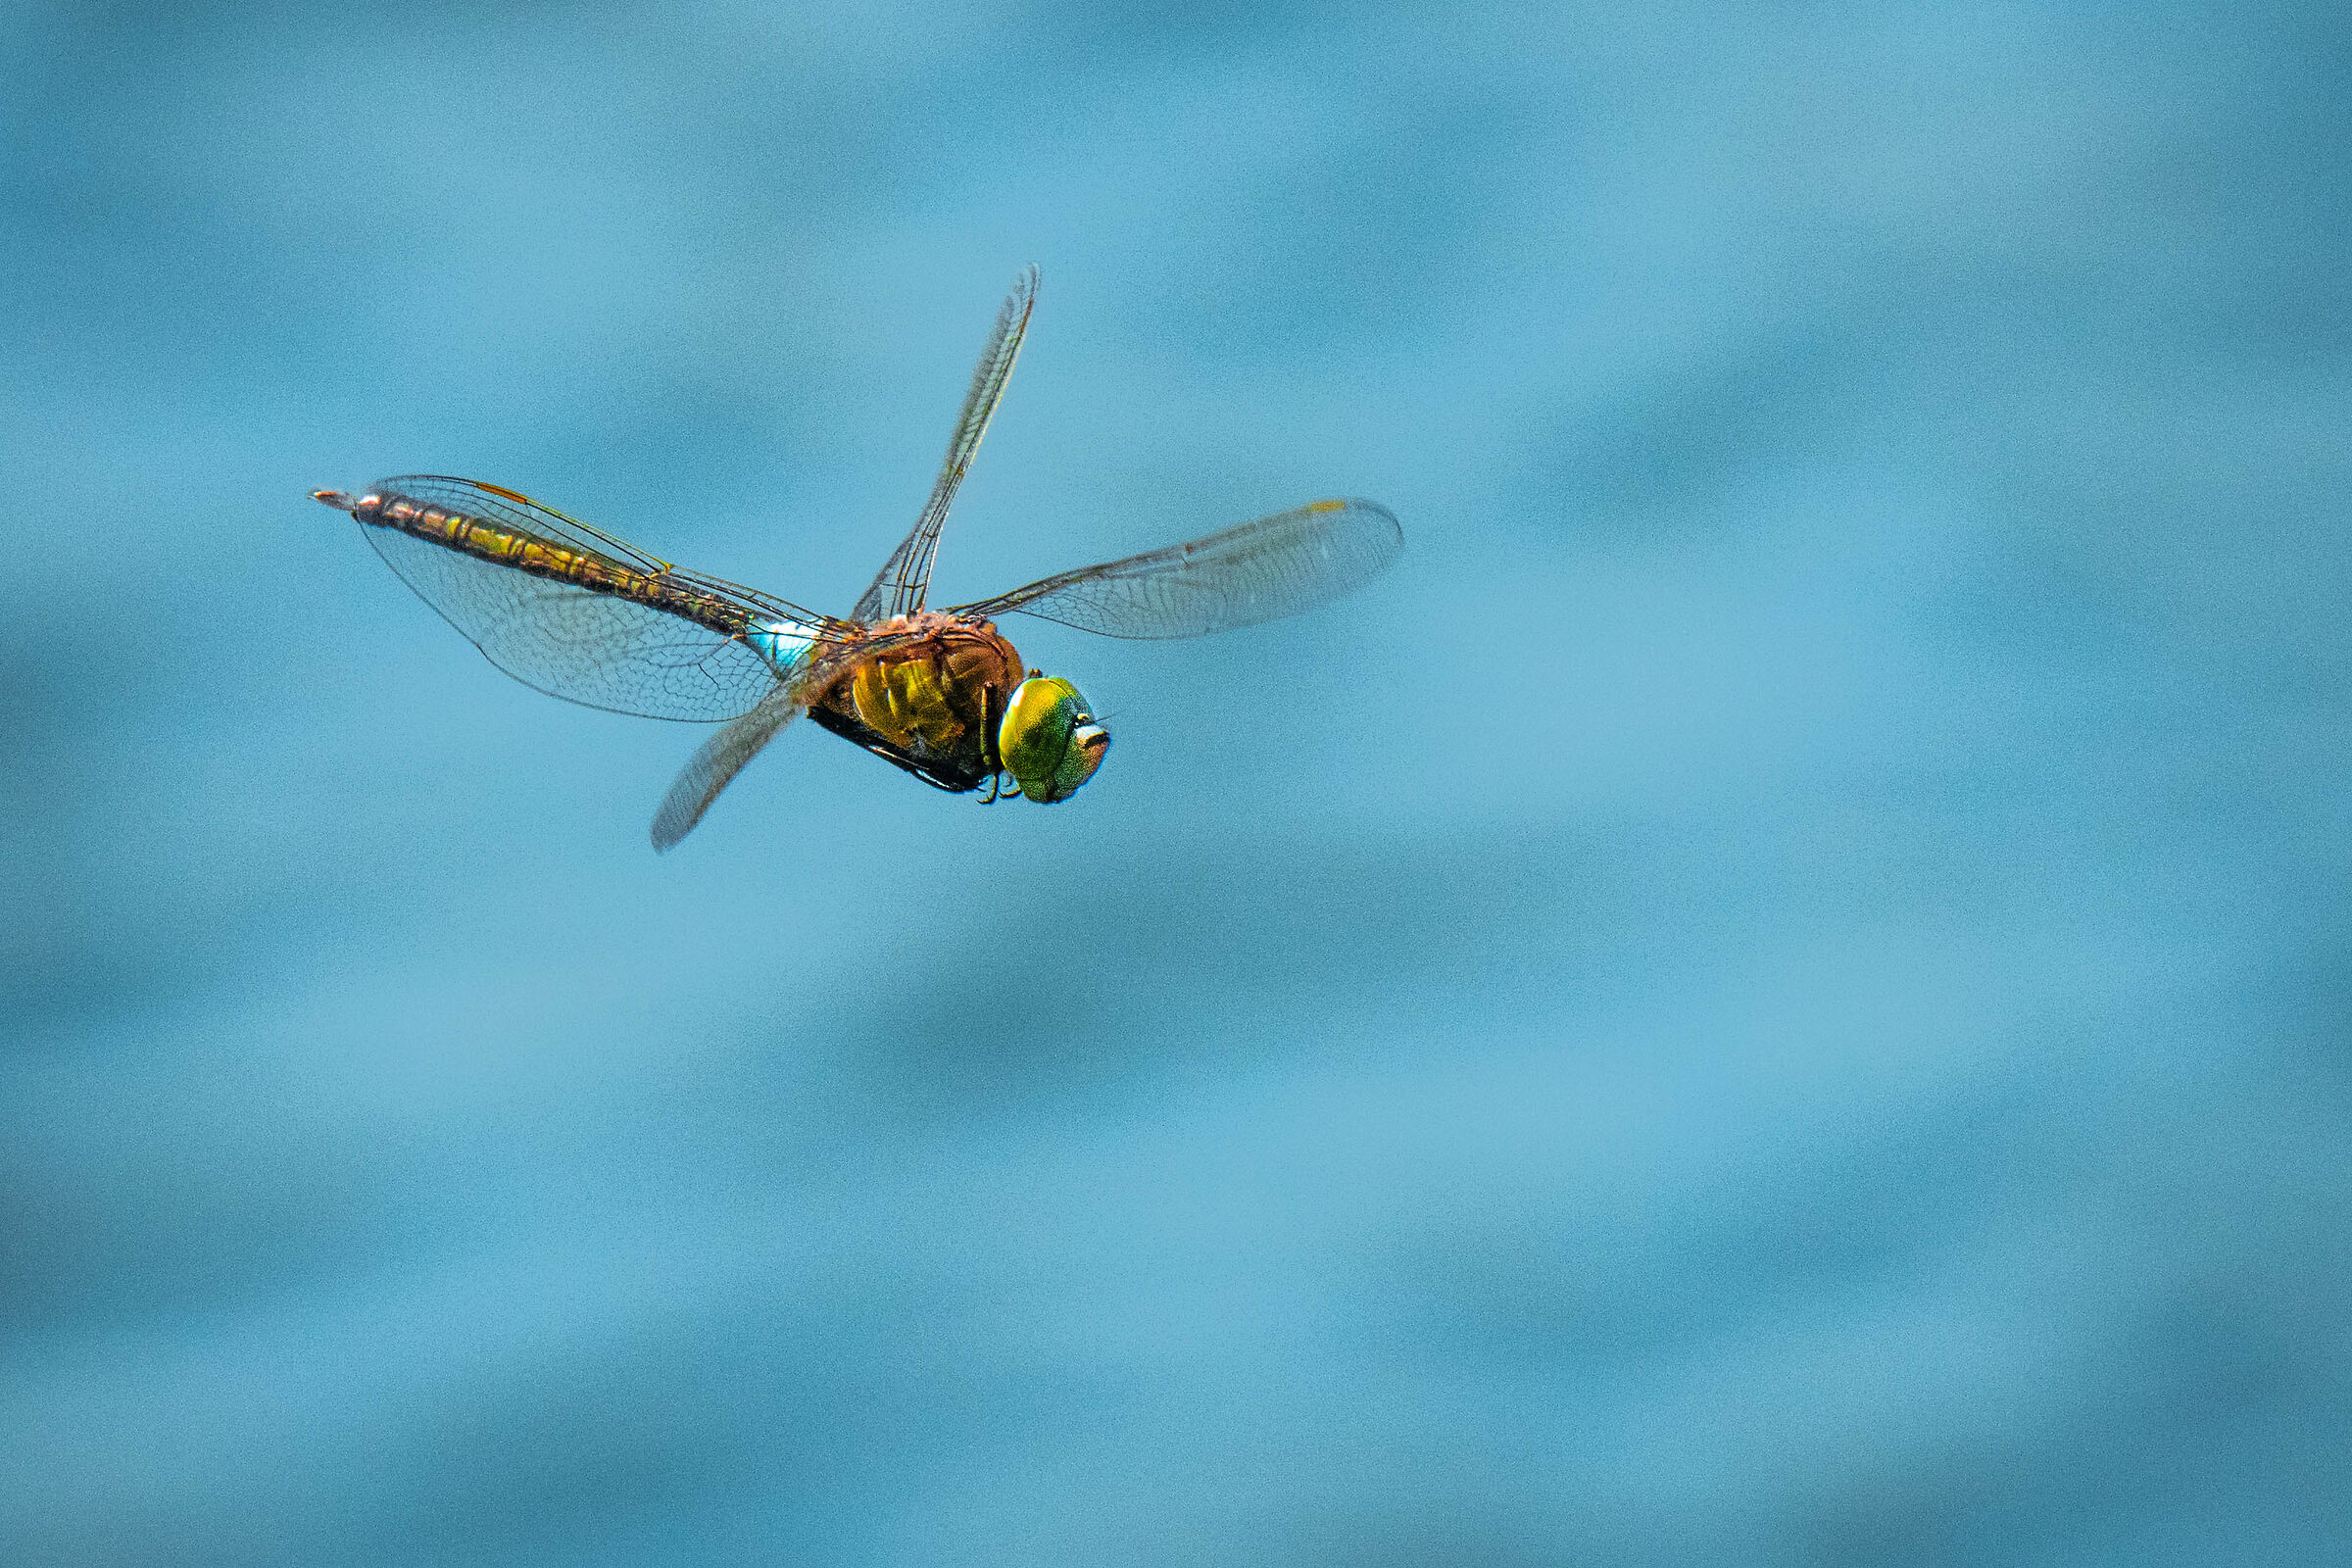 Dragonfly flying over the lake...